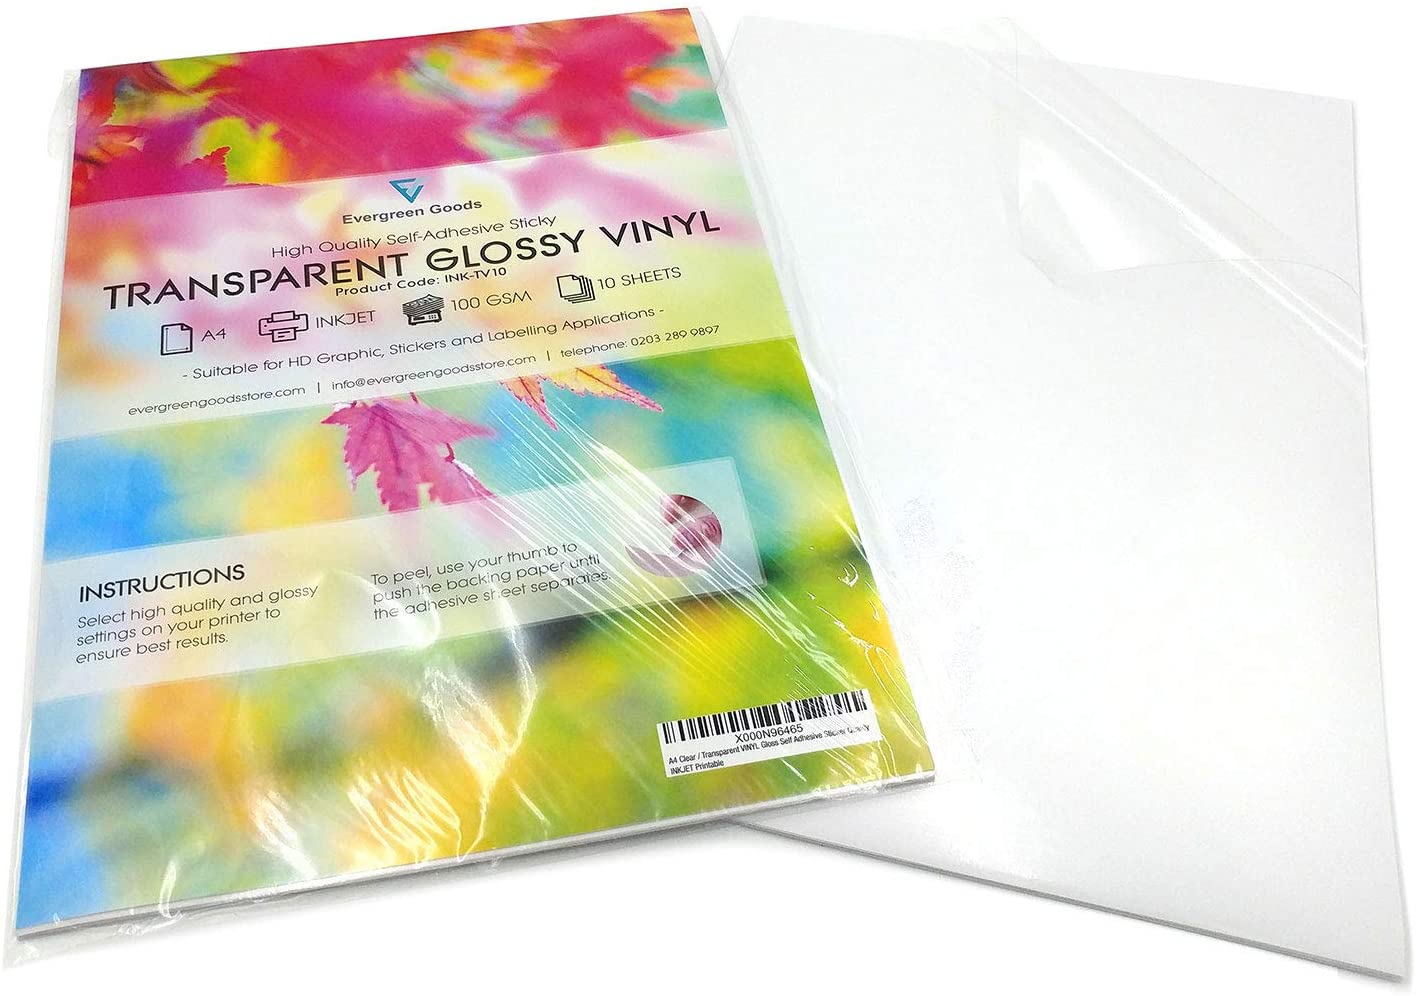 100 Sheets Self Adhesive A4 Clear/Transparent Vinyl Glossy Self Adhesive Sticker Quality Inkjet